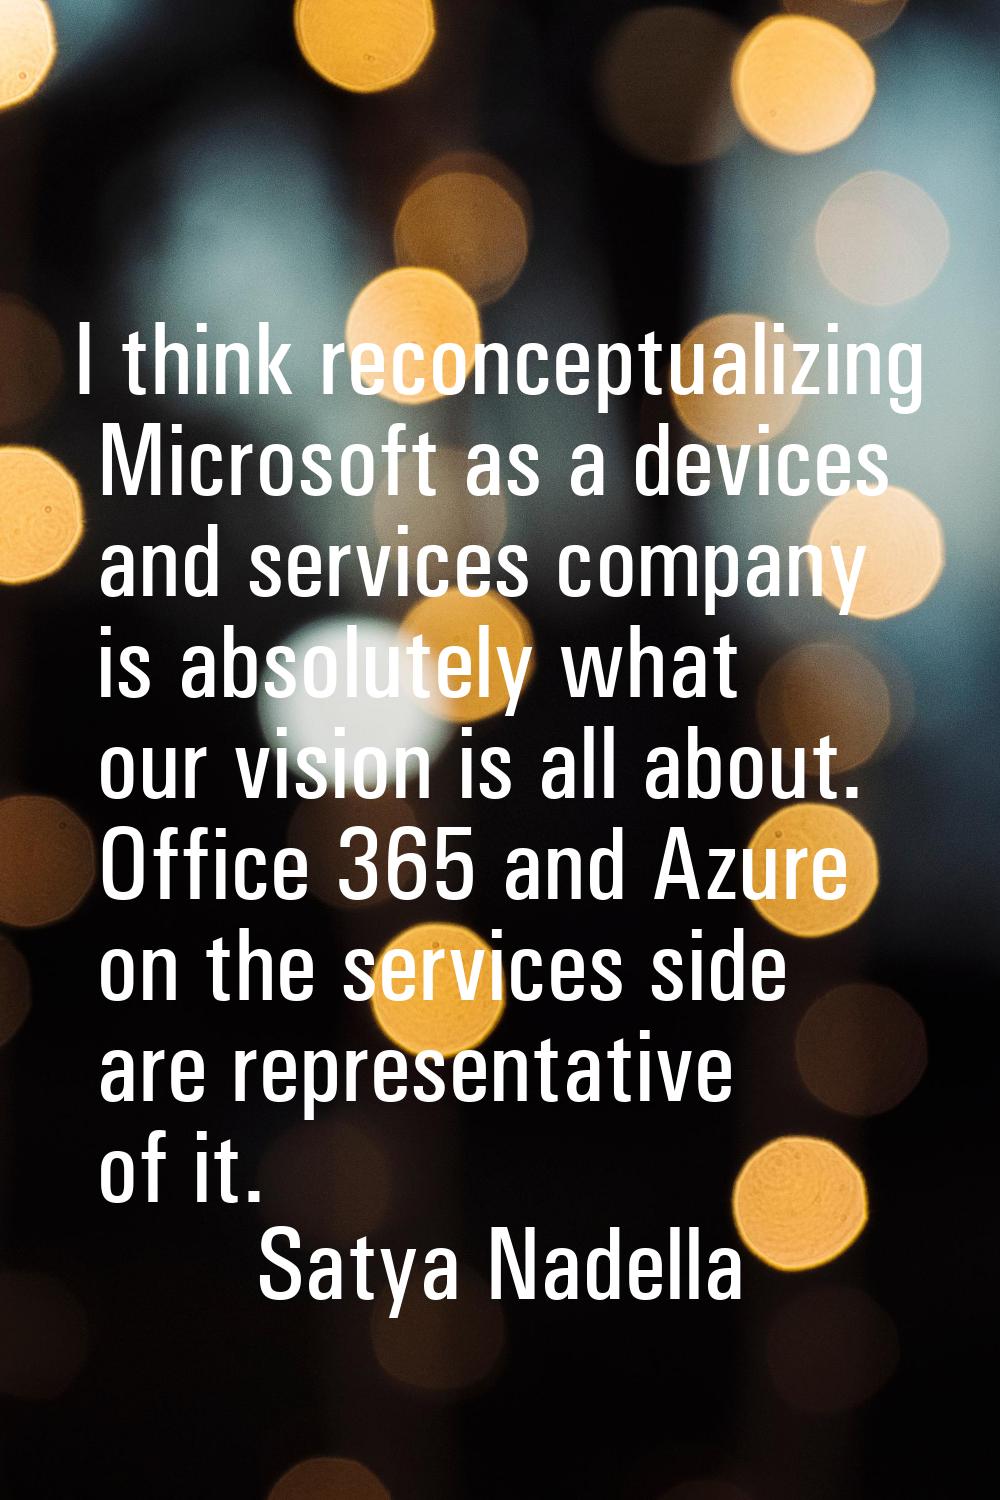 I think reconceptualizing Microsoft as a devices and services company is absolutely what our vision